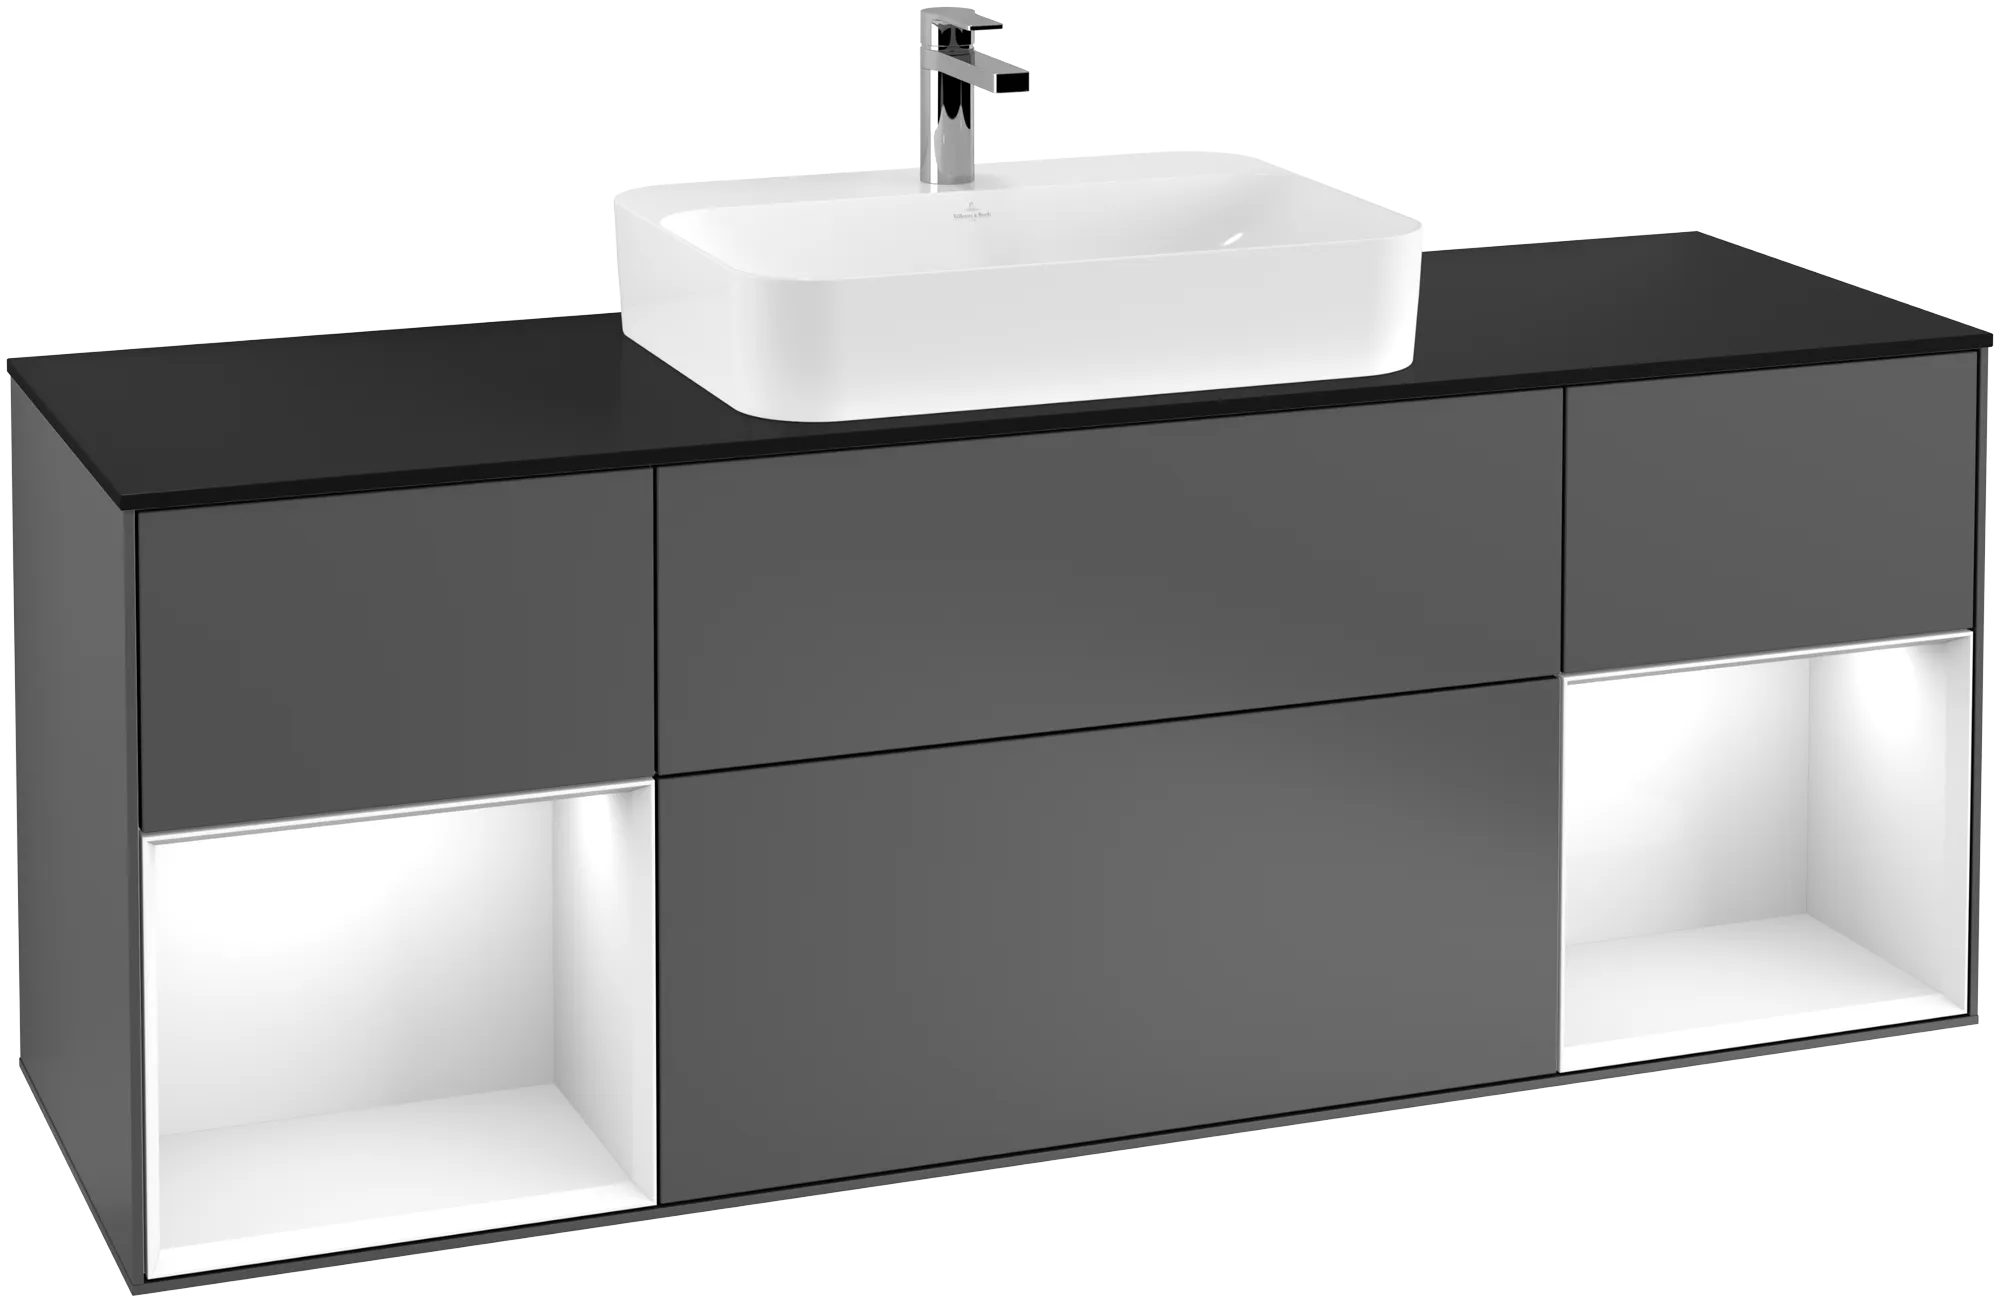 Obrázek VILLEROY BOCH Finion Vanity unit, with lighting, 4 pull-out compartments, 1600 x 603 x 501 mm, Anthracite Matt Lacquer / Glossy White Lacquer / Glass Black Matt #G452GFGK